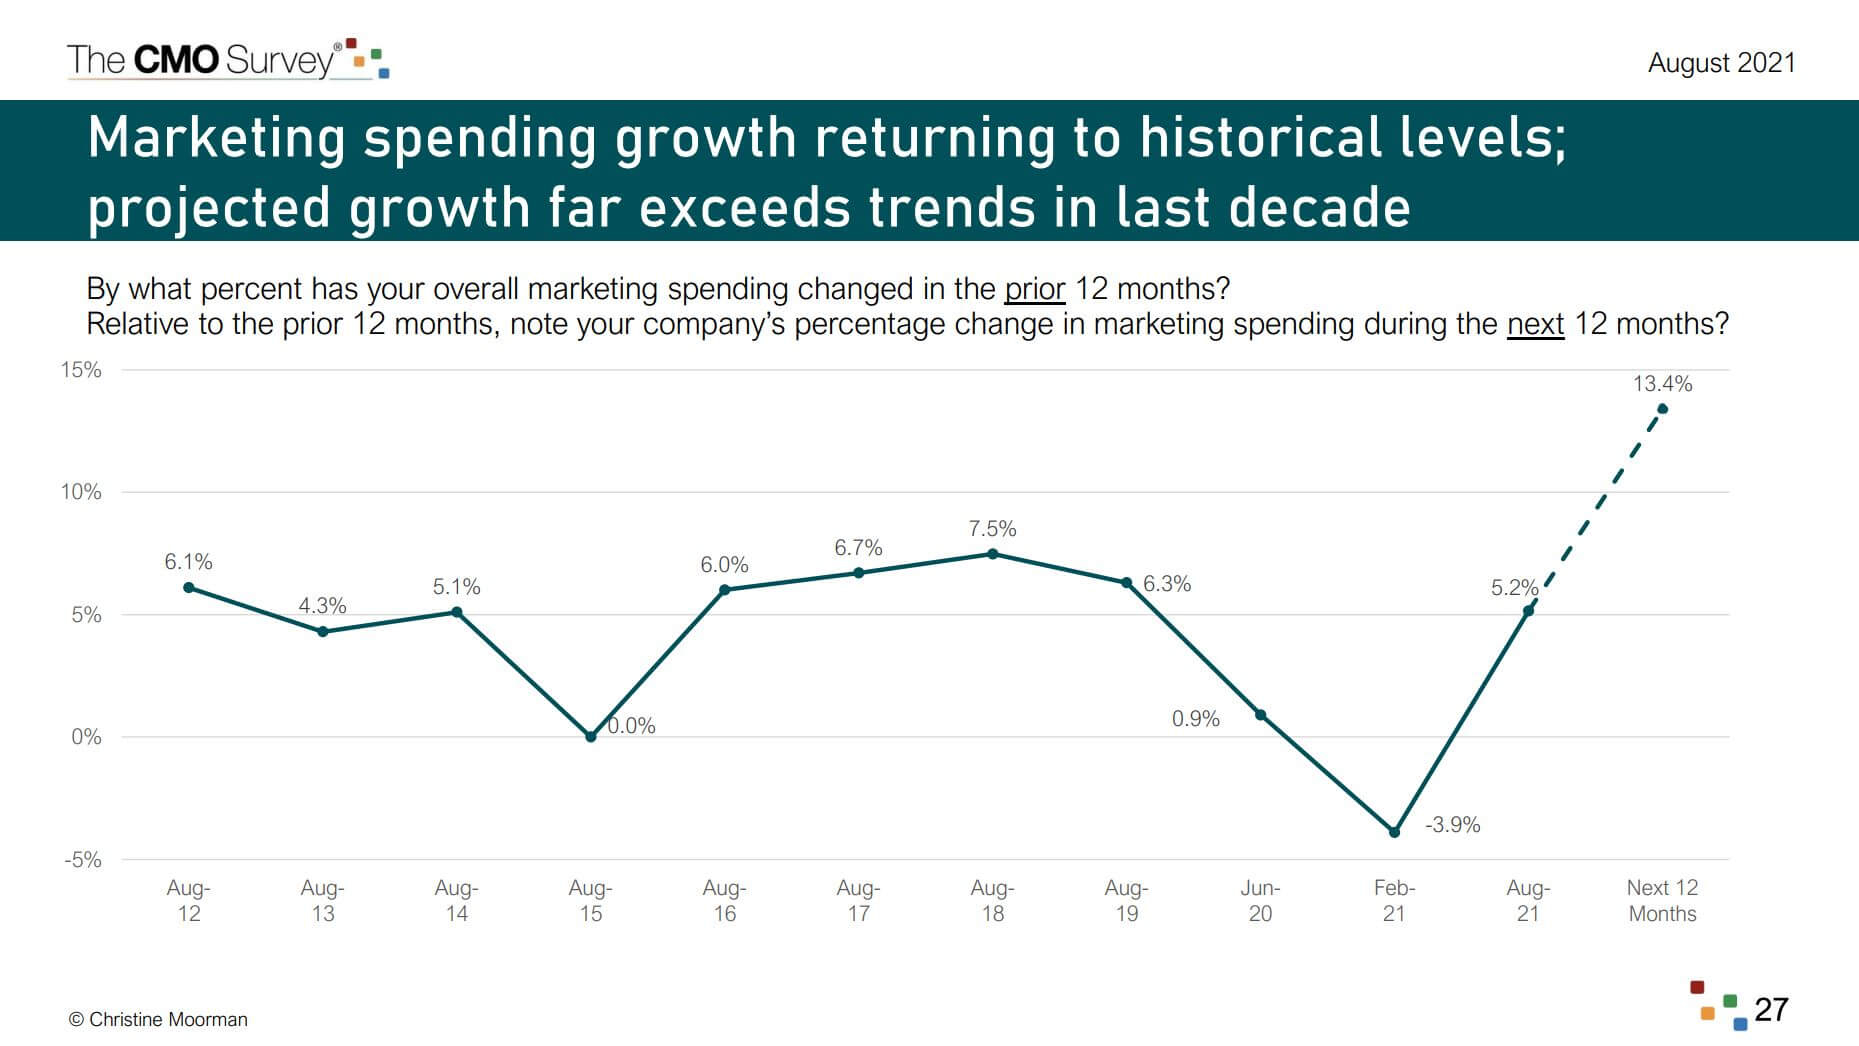 Marketing spending growth returning to historical kevels; projected growth far exceeds trends in last decade